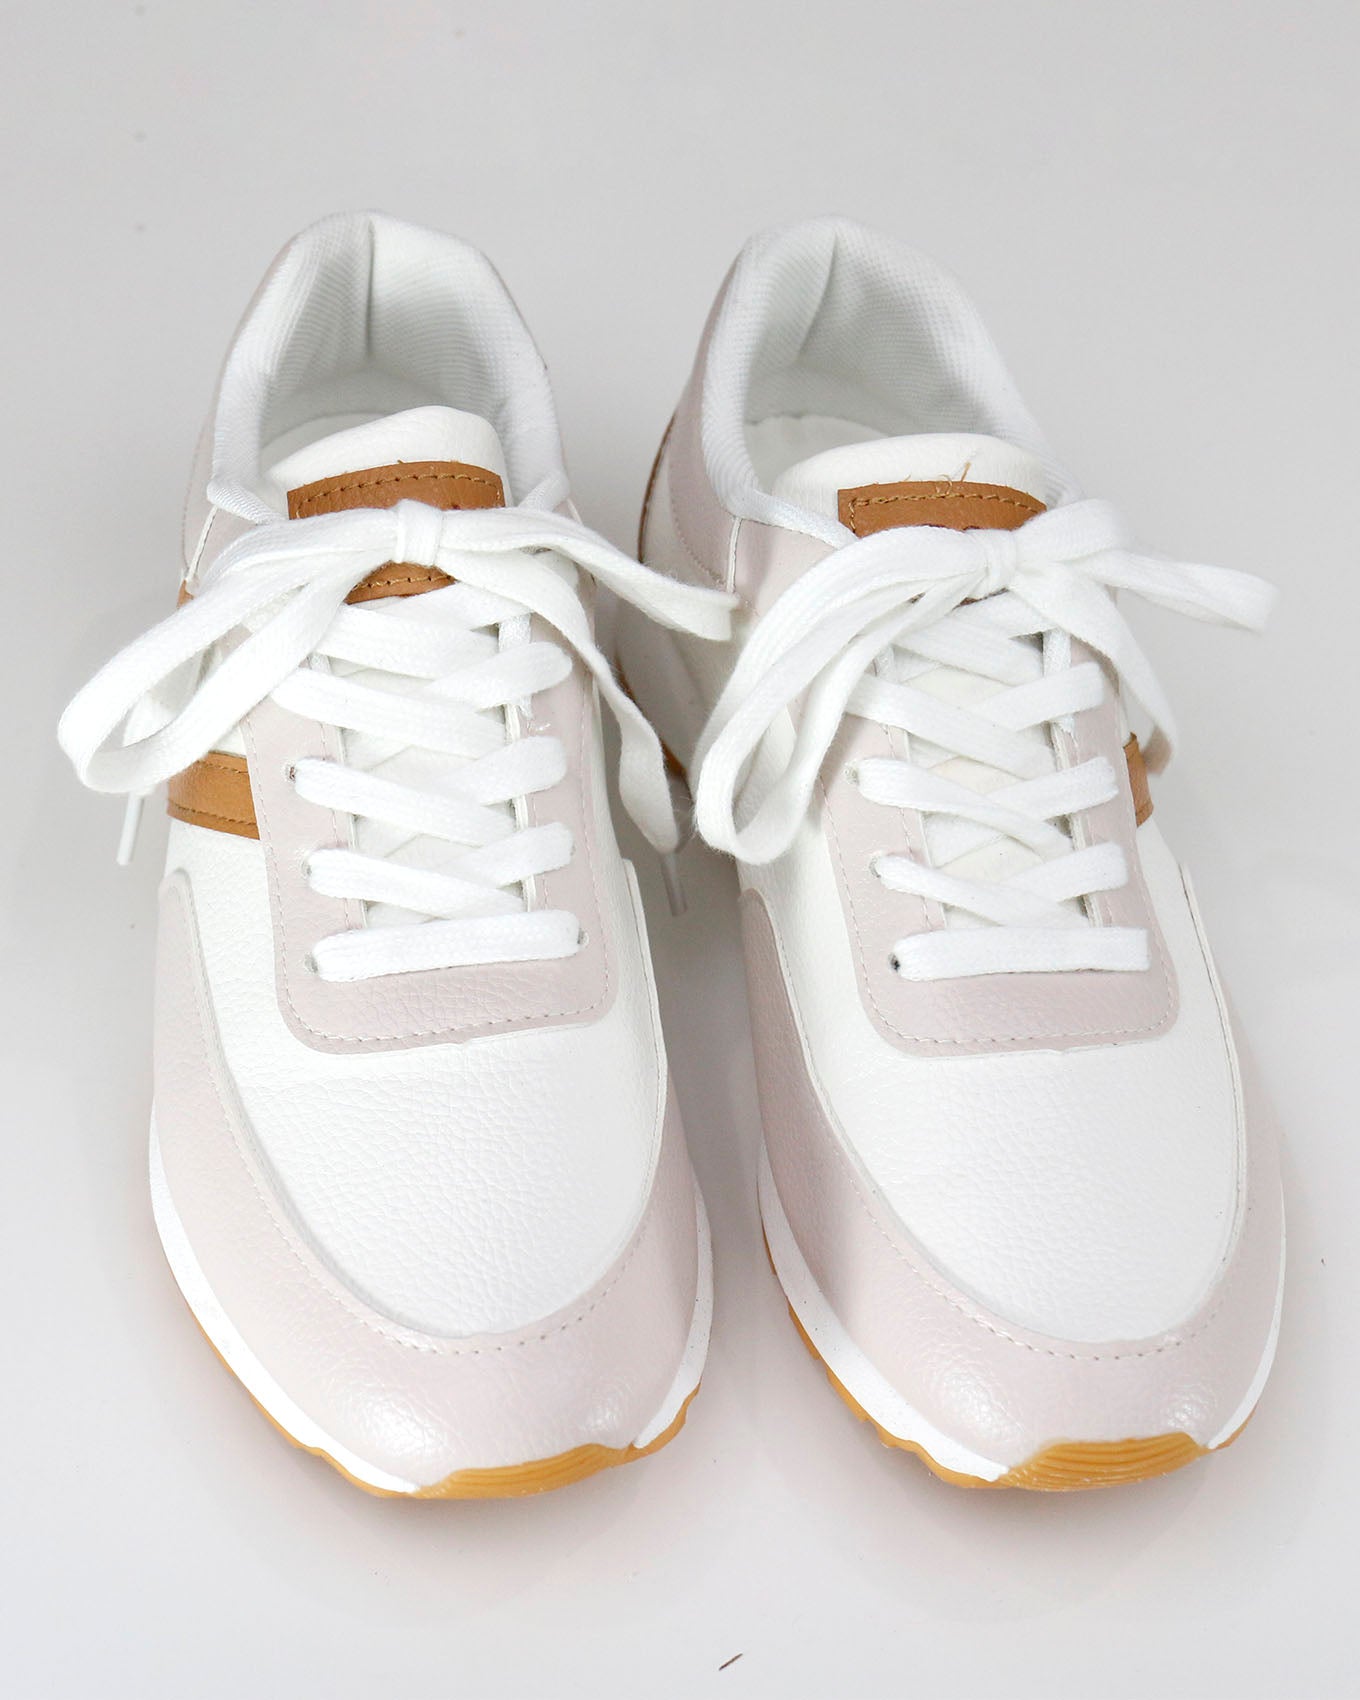 Sneakers Grace - Tan/Nude and Lace Street